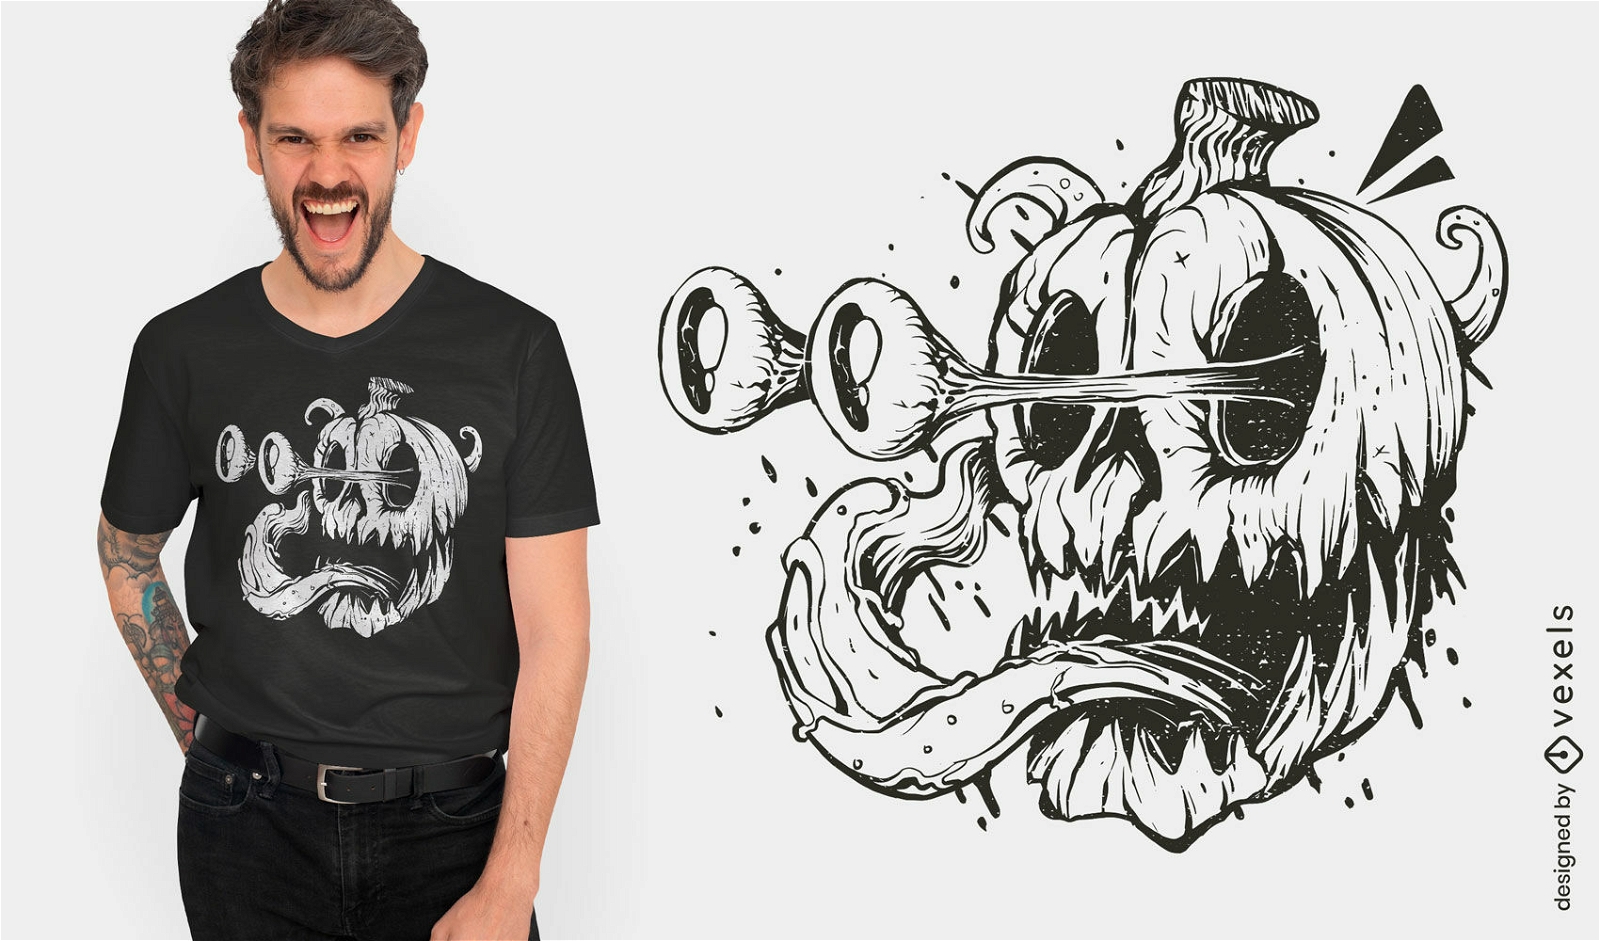 Scared PNG Designs for T Shirt & Merch